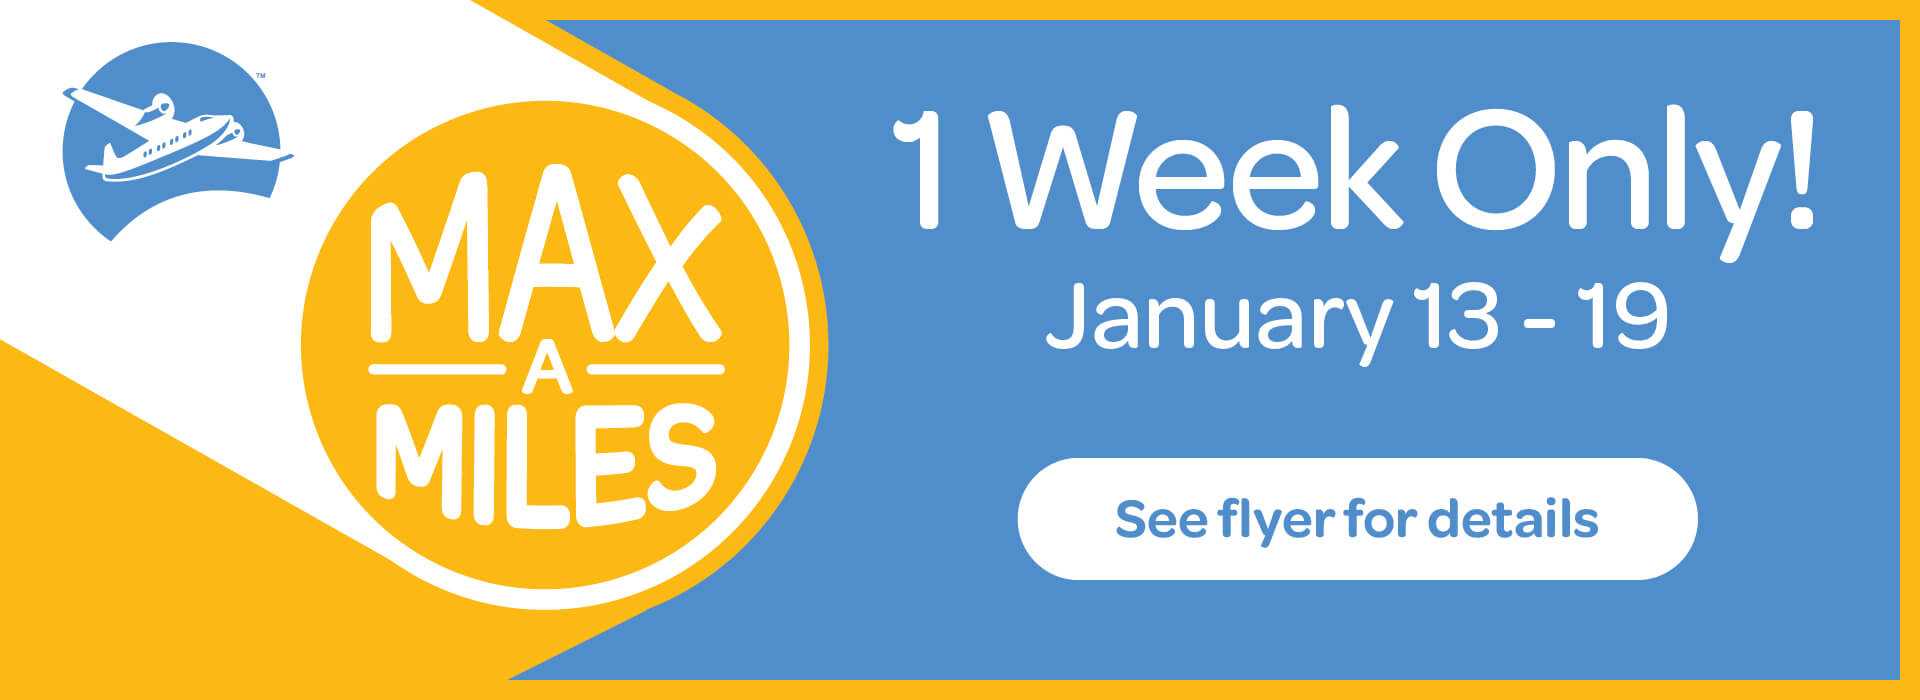 Text Reading 'Explore our Max A Miles Flyers. Valid for one week only January thirteen to January nineteen.' Along with a 'See flyer' button below.